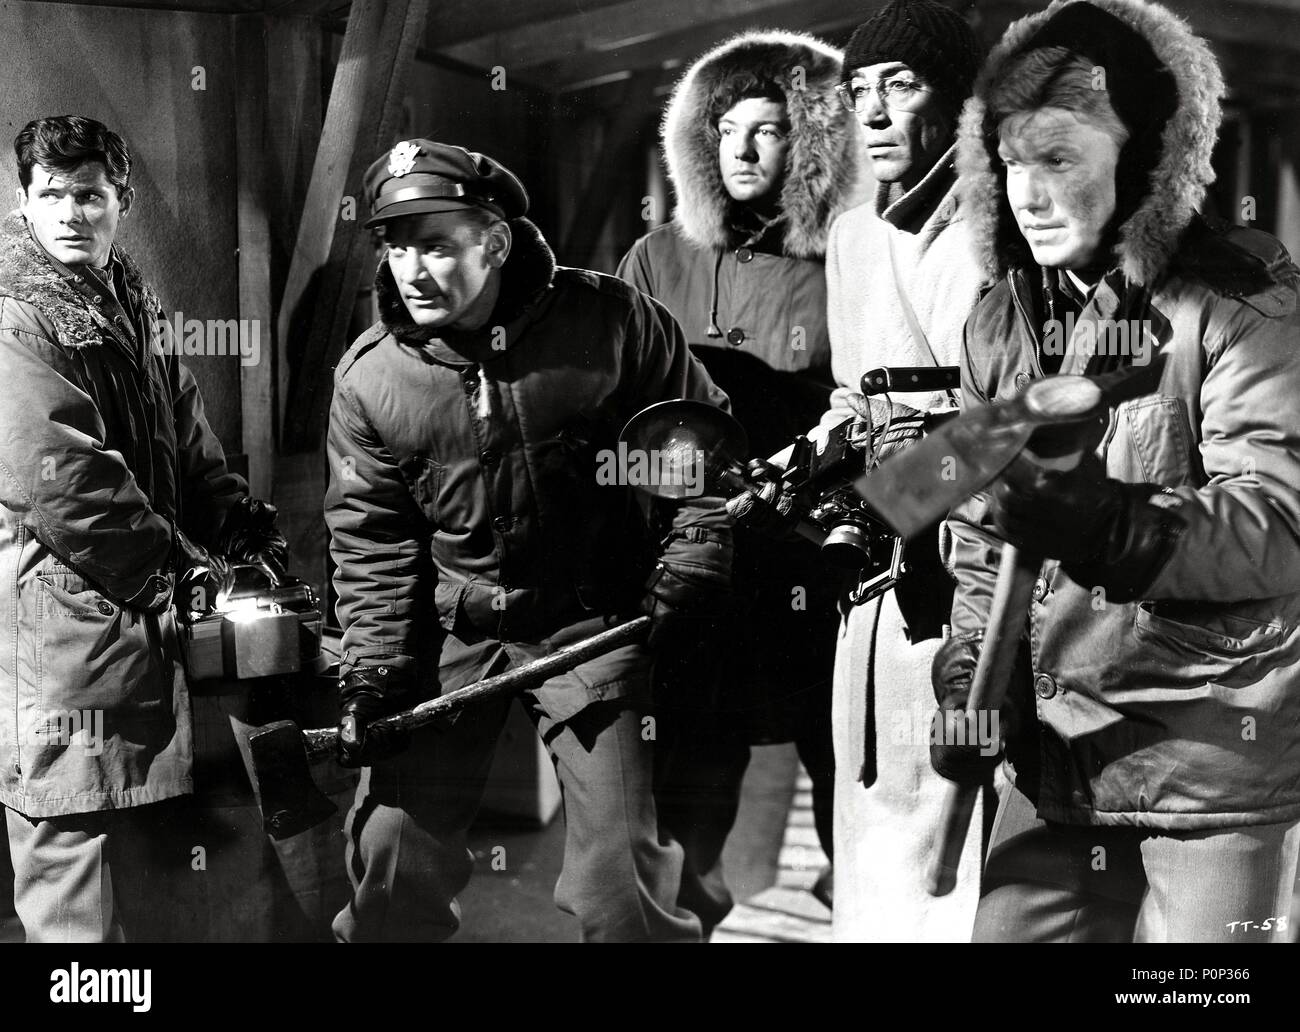 Original Film Title: THE THING FROM ANOTHER WORLD. English Title: THE THING  FROM ANOTHER WORLD. Film Director: HOWARD HAWKS. Year: 1951. Stars: KENNETH  TOBEY; DEWEY MARTIN; DOUGLAS SPENCER. Credit: RKO / Album